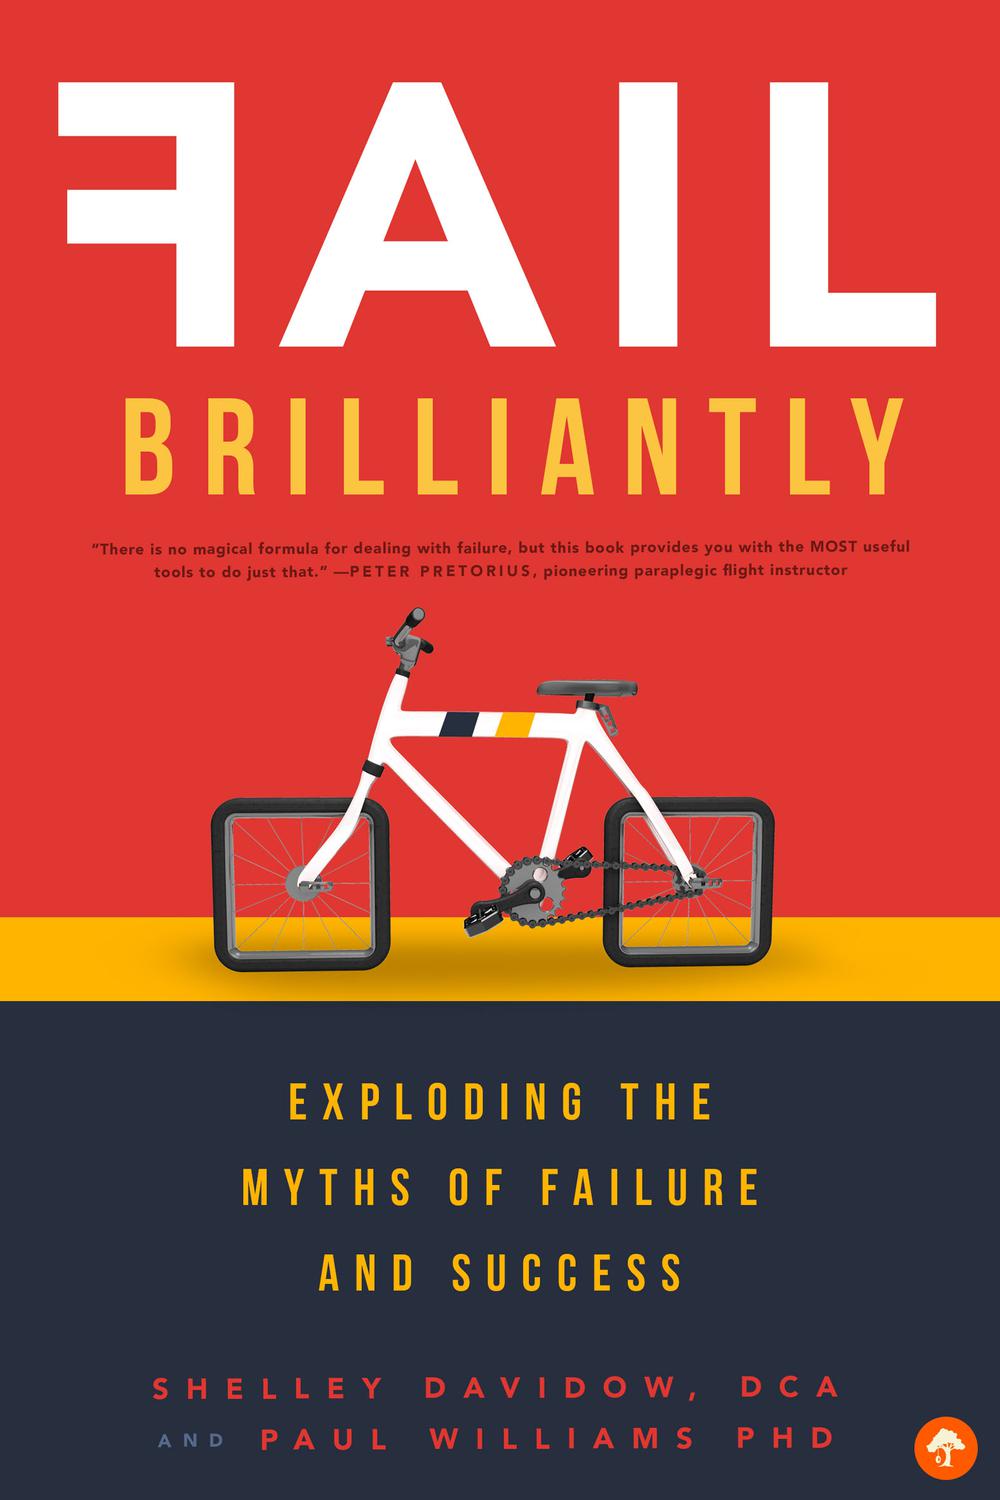 Fail Brilliantly by Shelley Davidow and Paul Williams